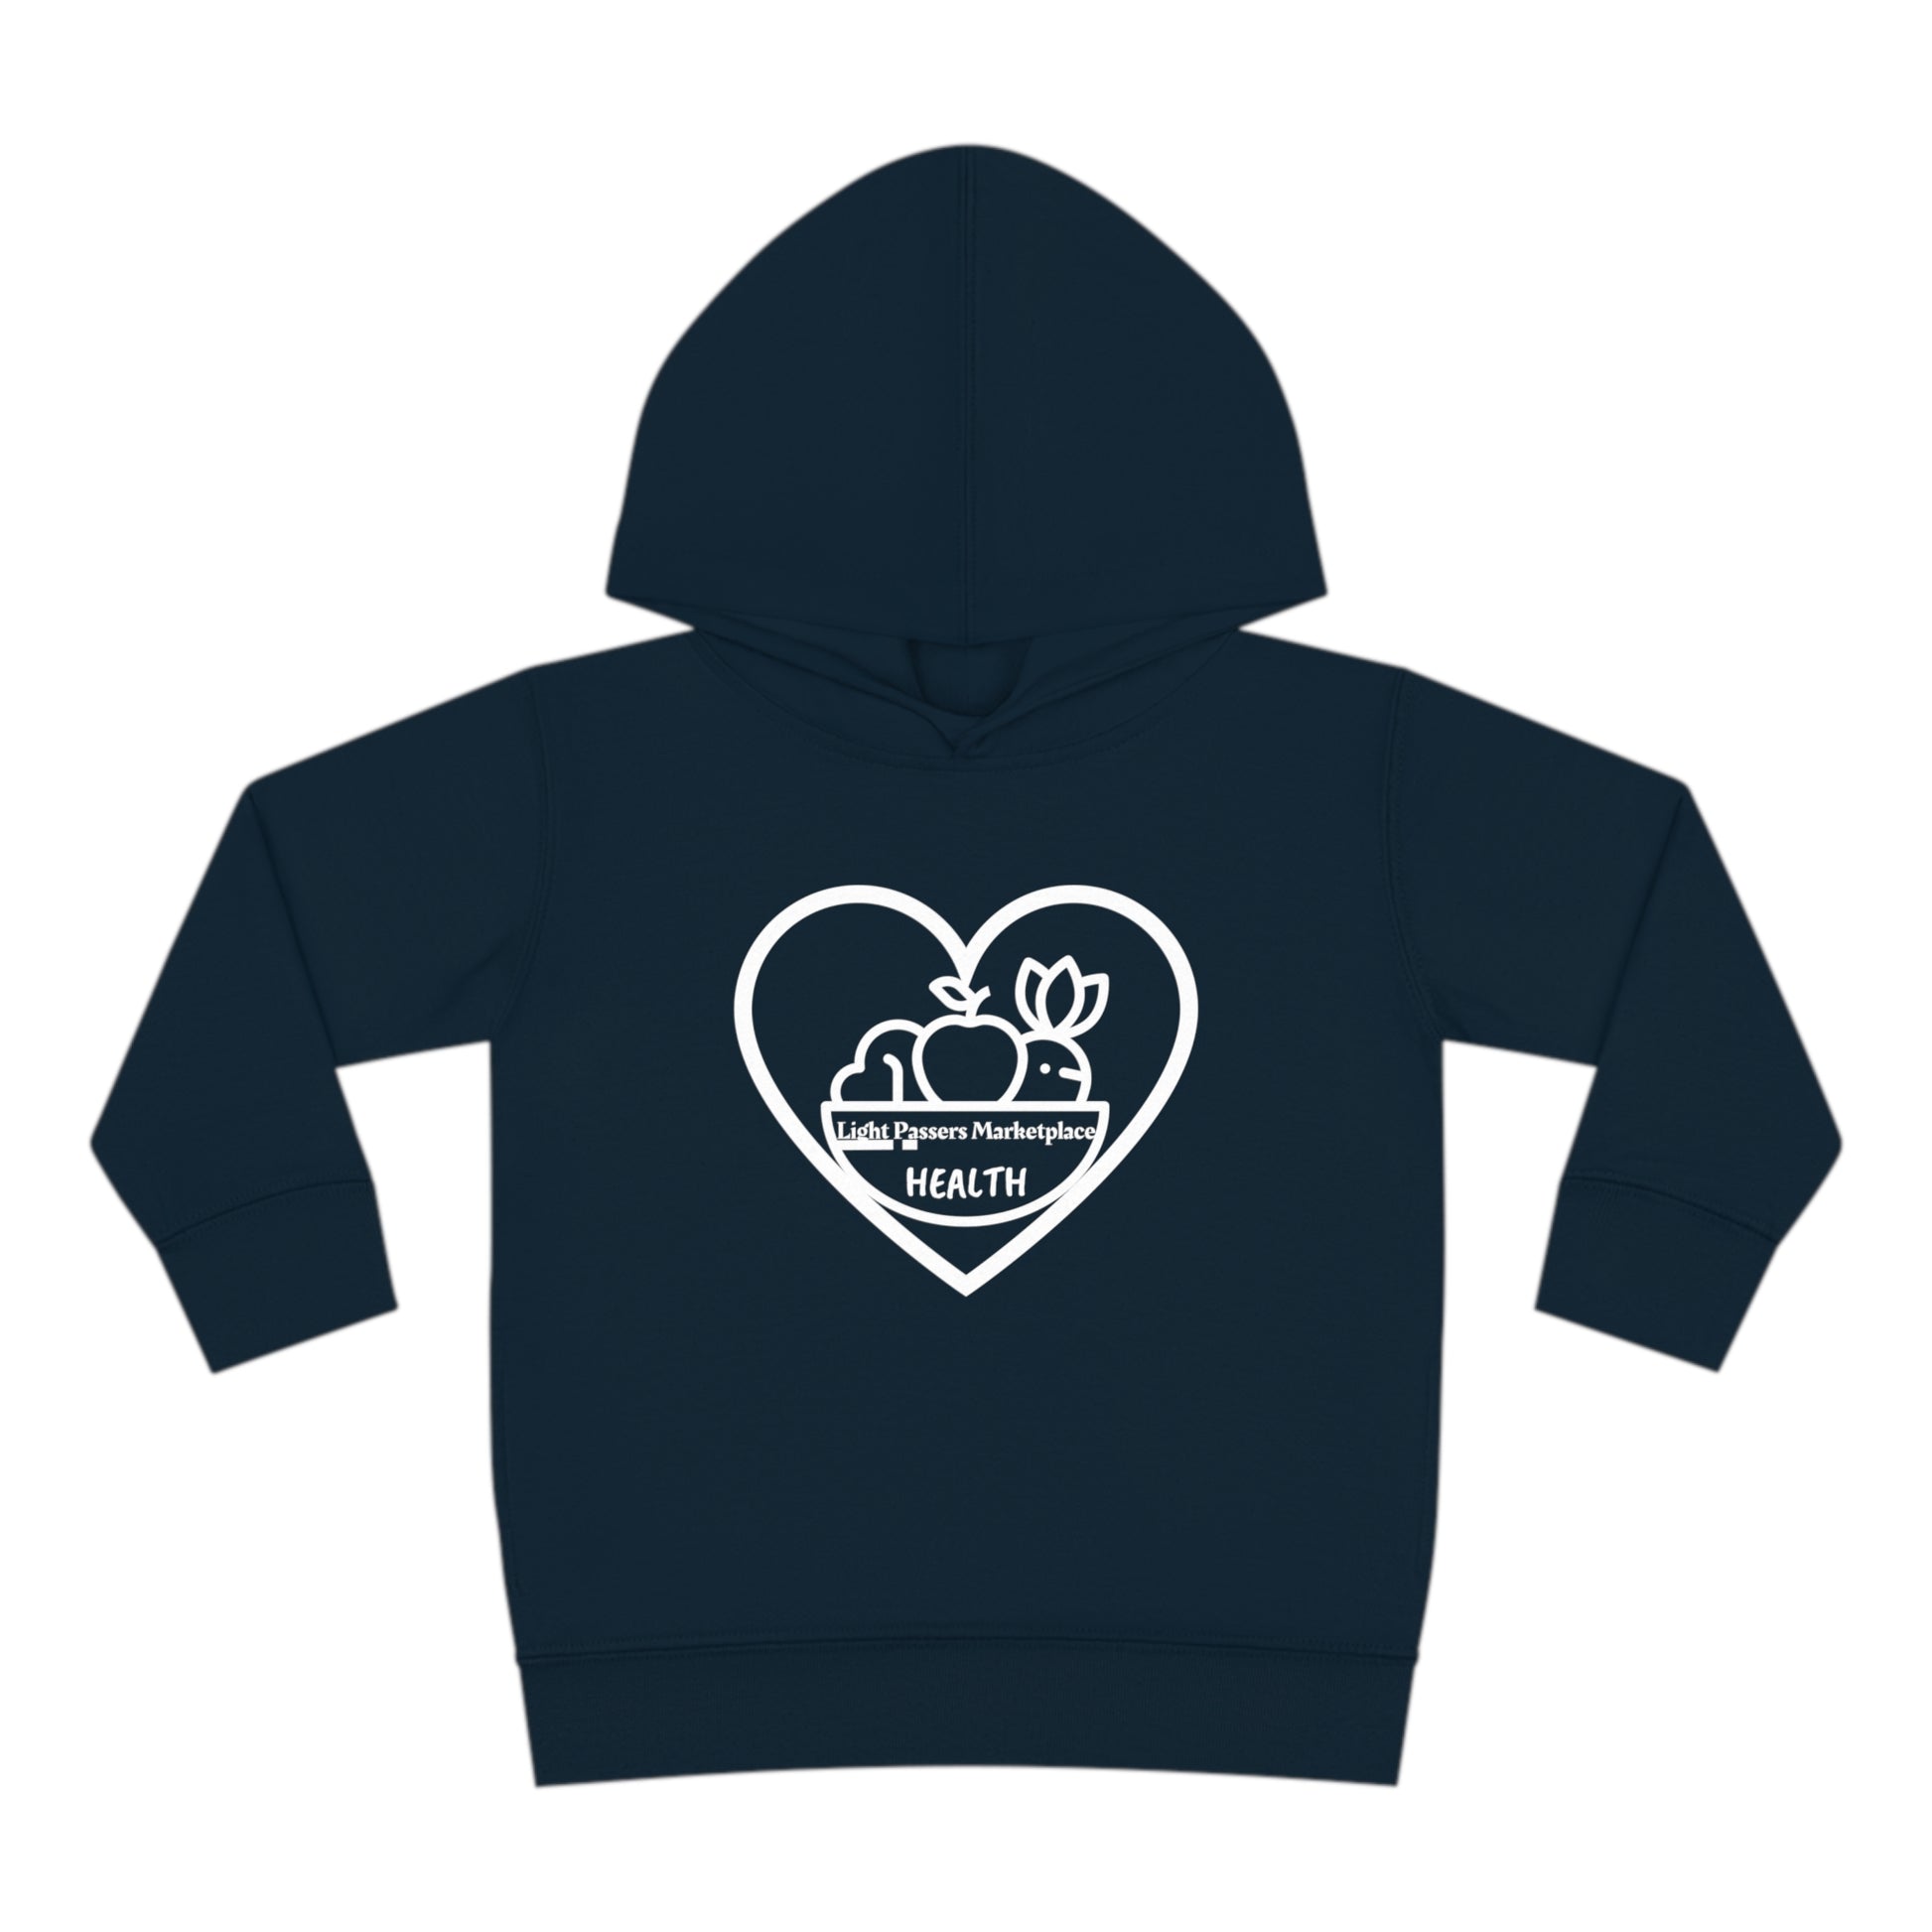 A Rabbit Skins Fruit Basket Toddler Hoodie in blue, featuring a heart and fruit design. Jersey-lined hood, double-needle stitching, side seam pockets for cozy durability. Made of 60% cotton, 40% polyester.